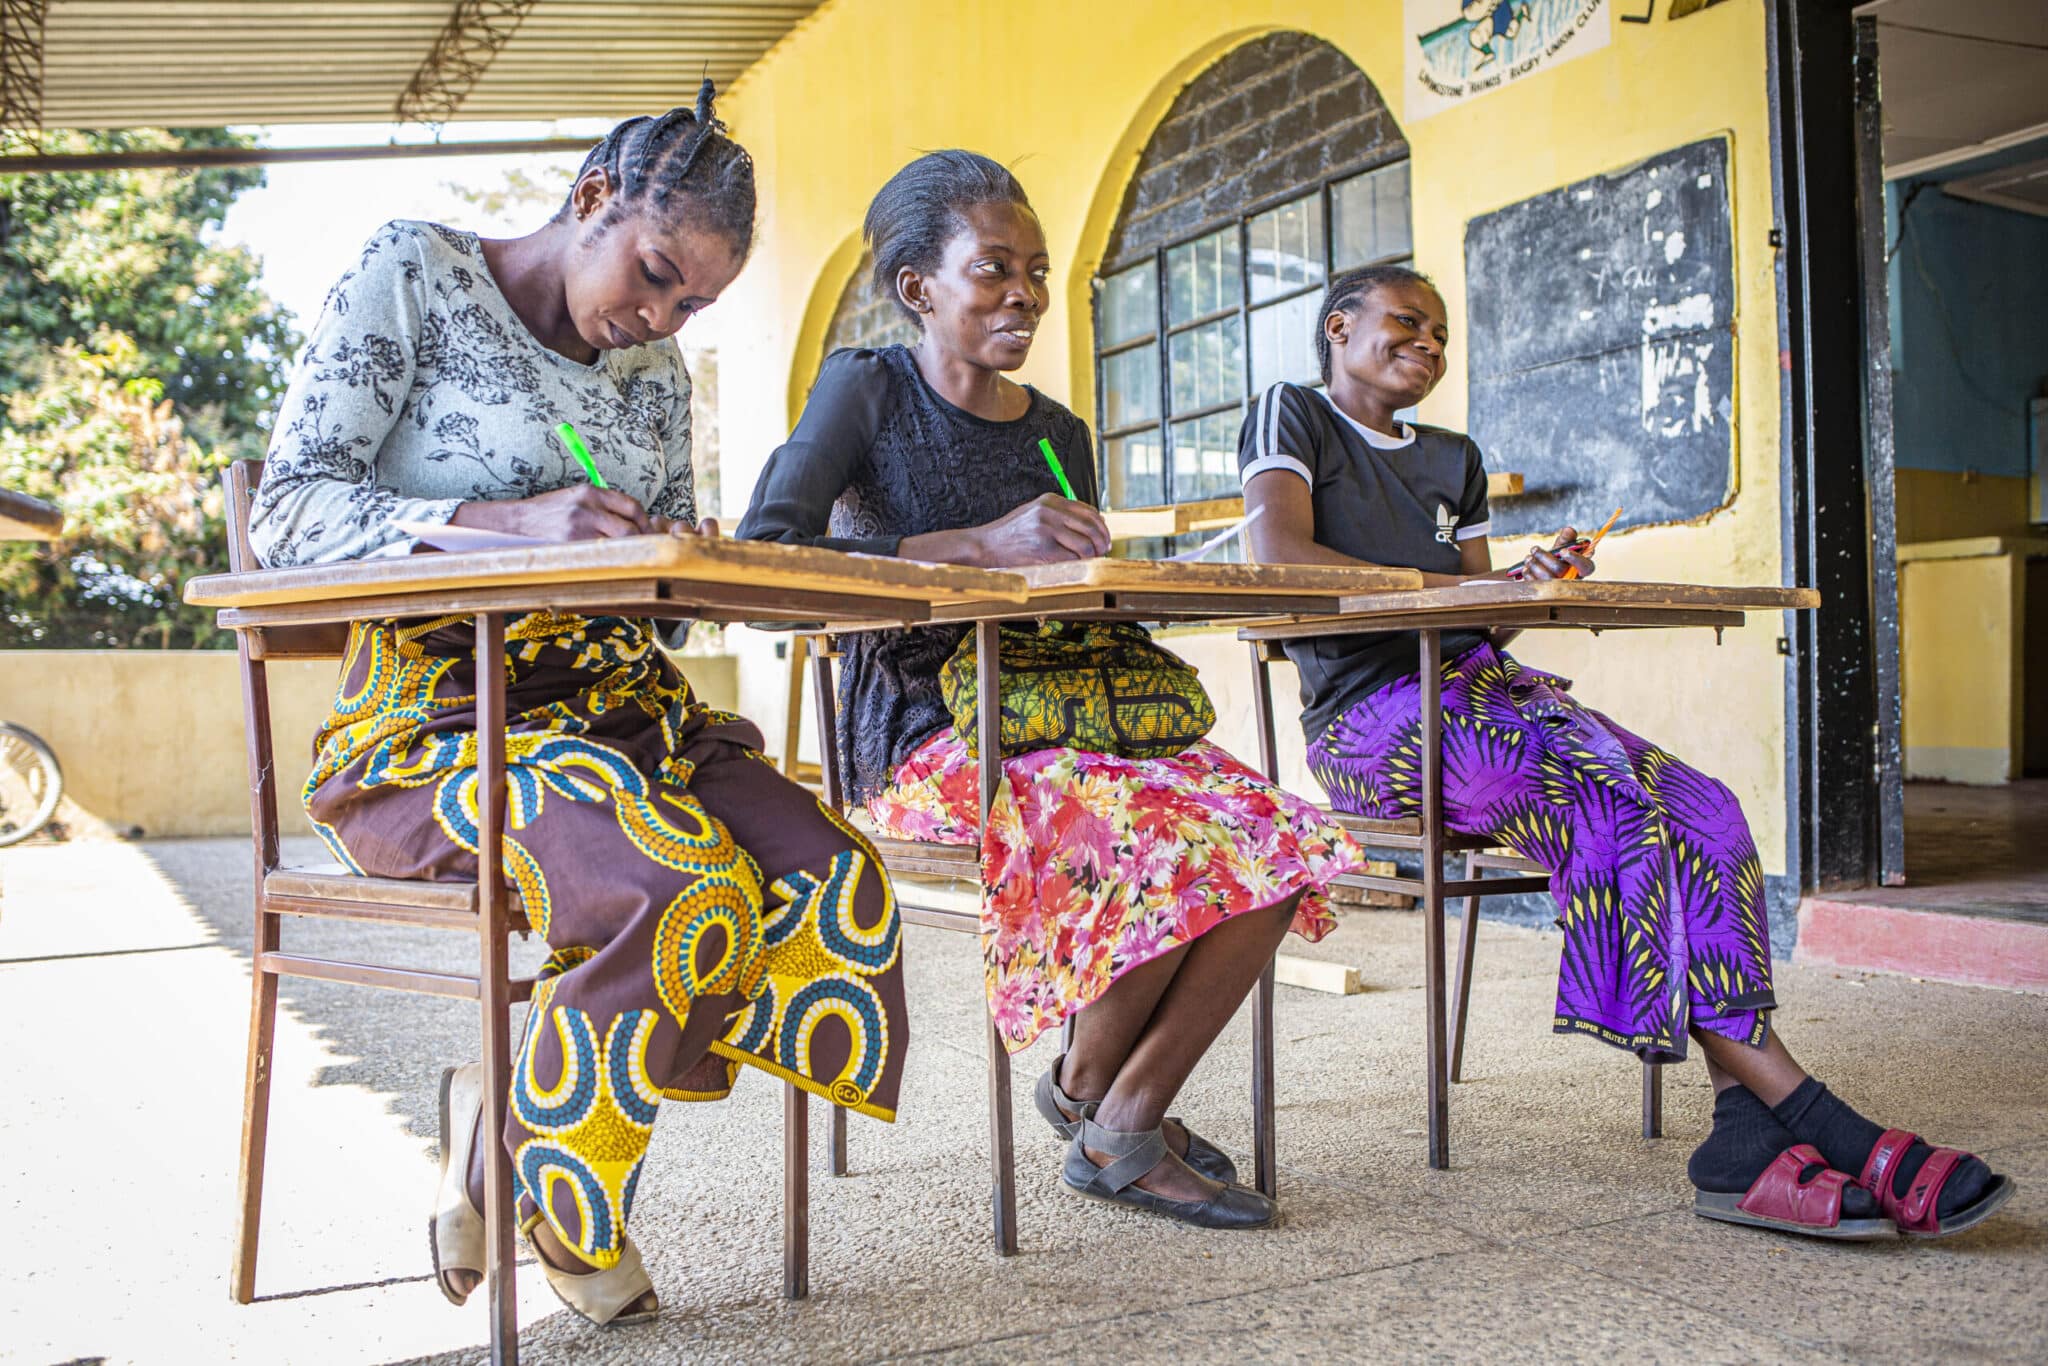 Three women seated at desks during adult literacy class.